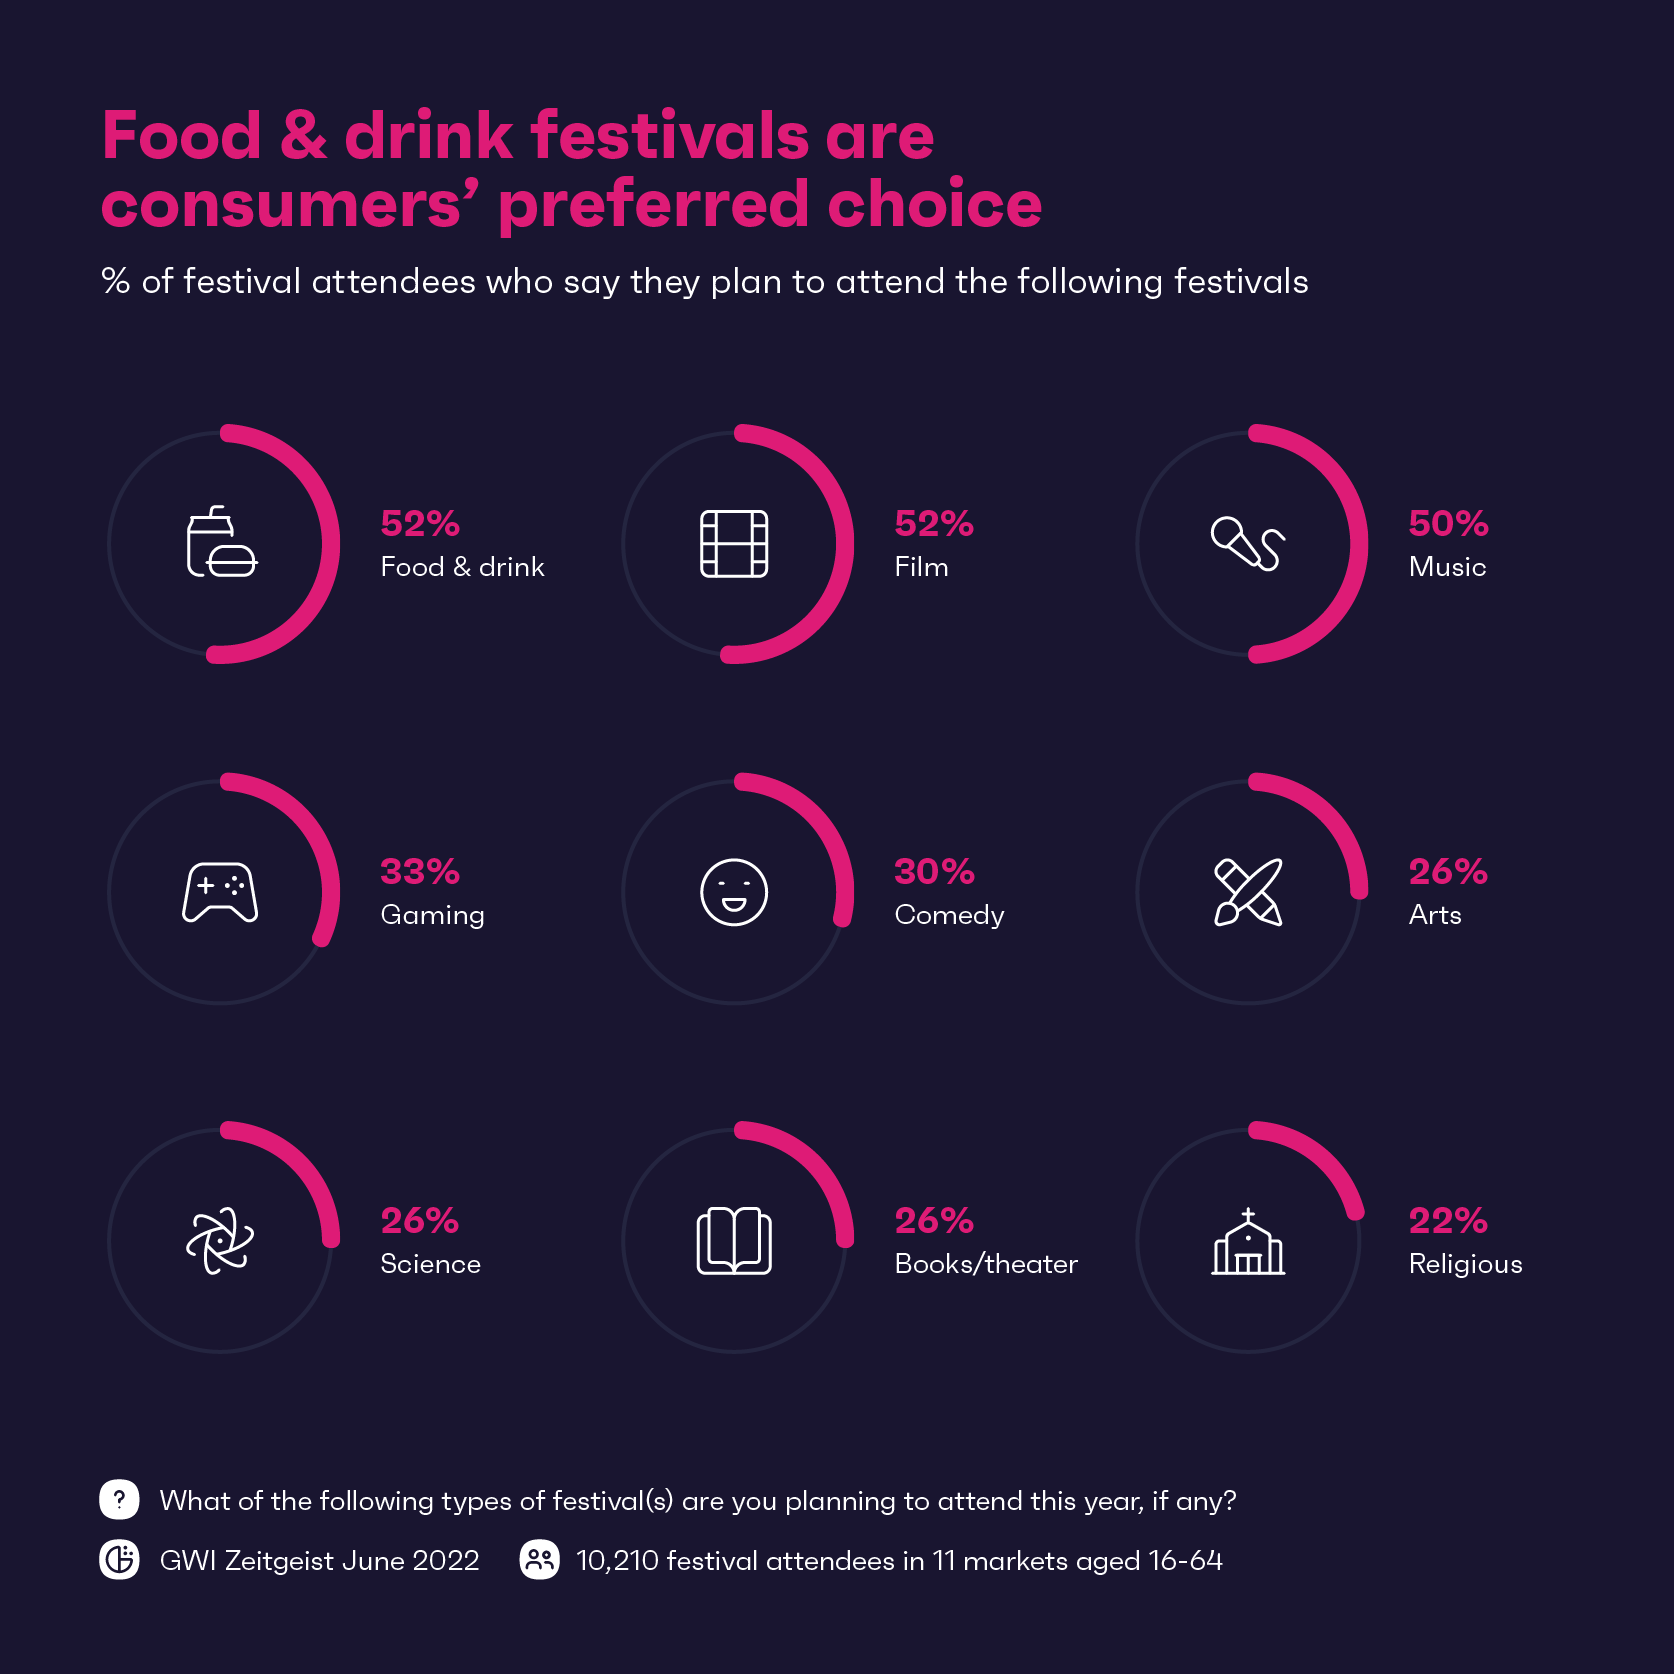 Food & drink festivals are consumers' preferred choice